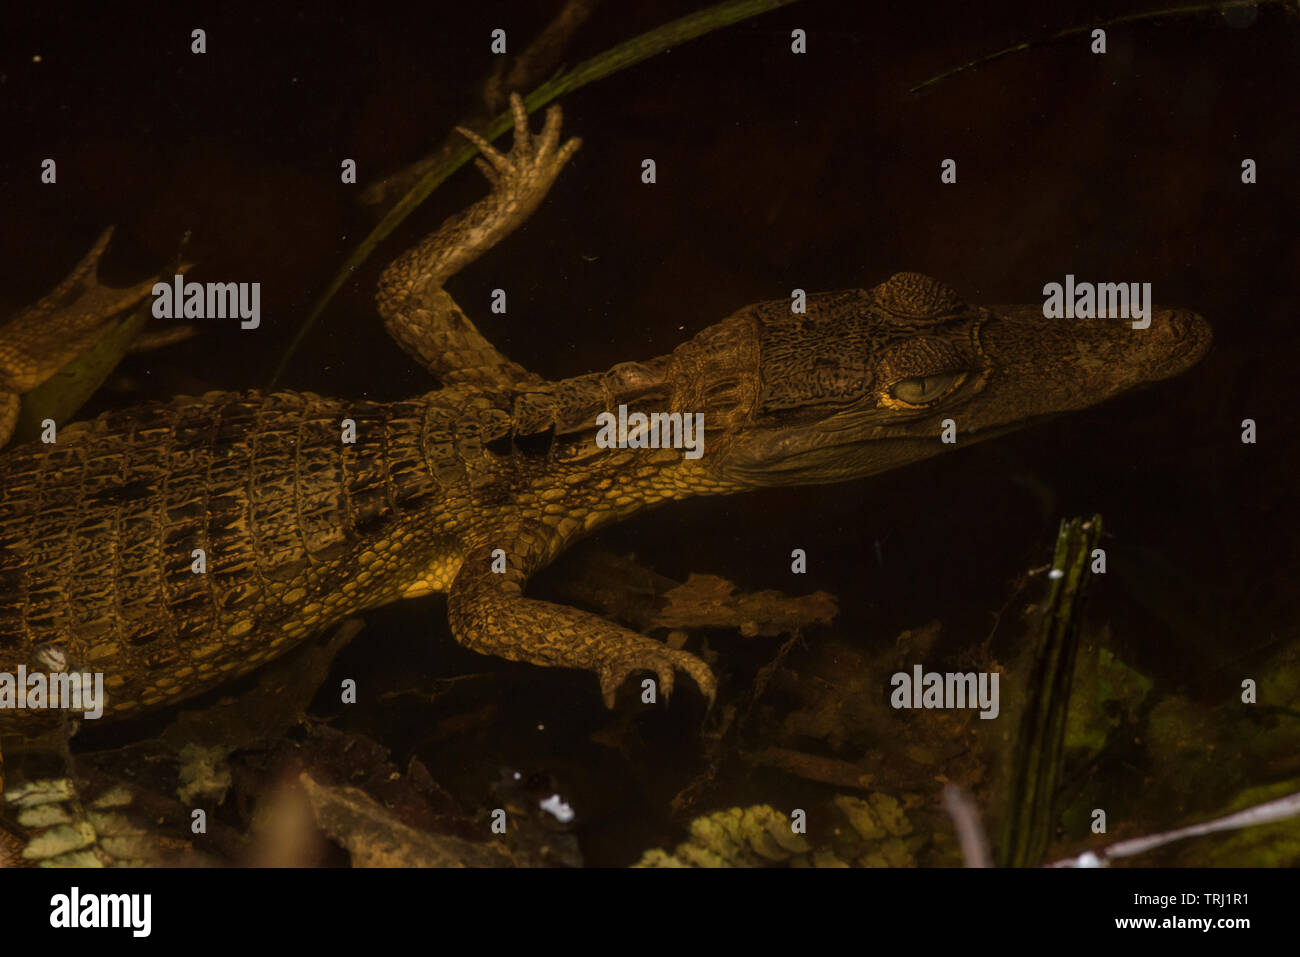 Spectacled caiman (Caiman crocodilus) submerged underwater in a small stream in the Amazon jungle in Ecuador. Stock Photo